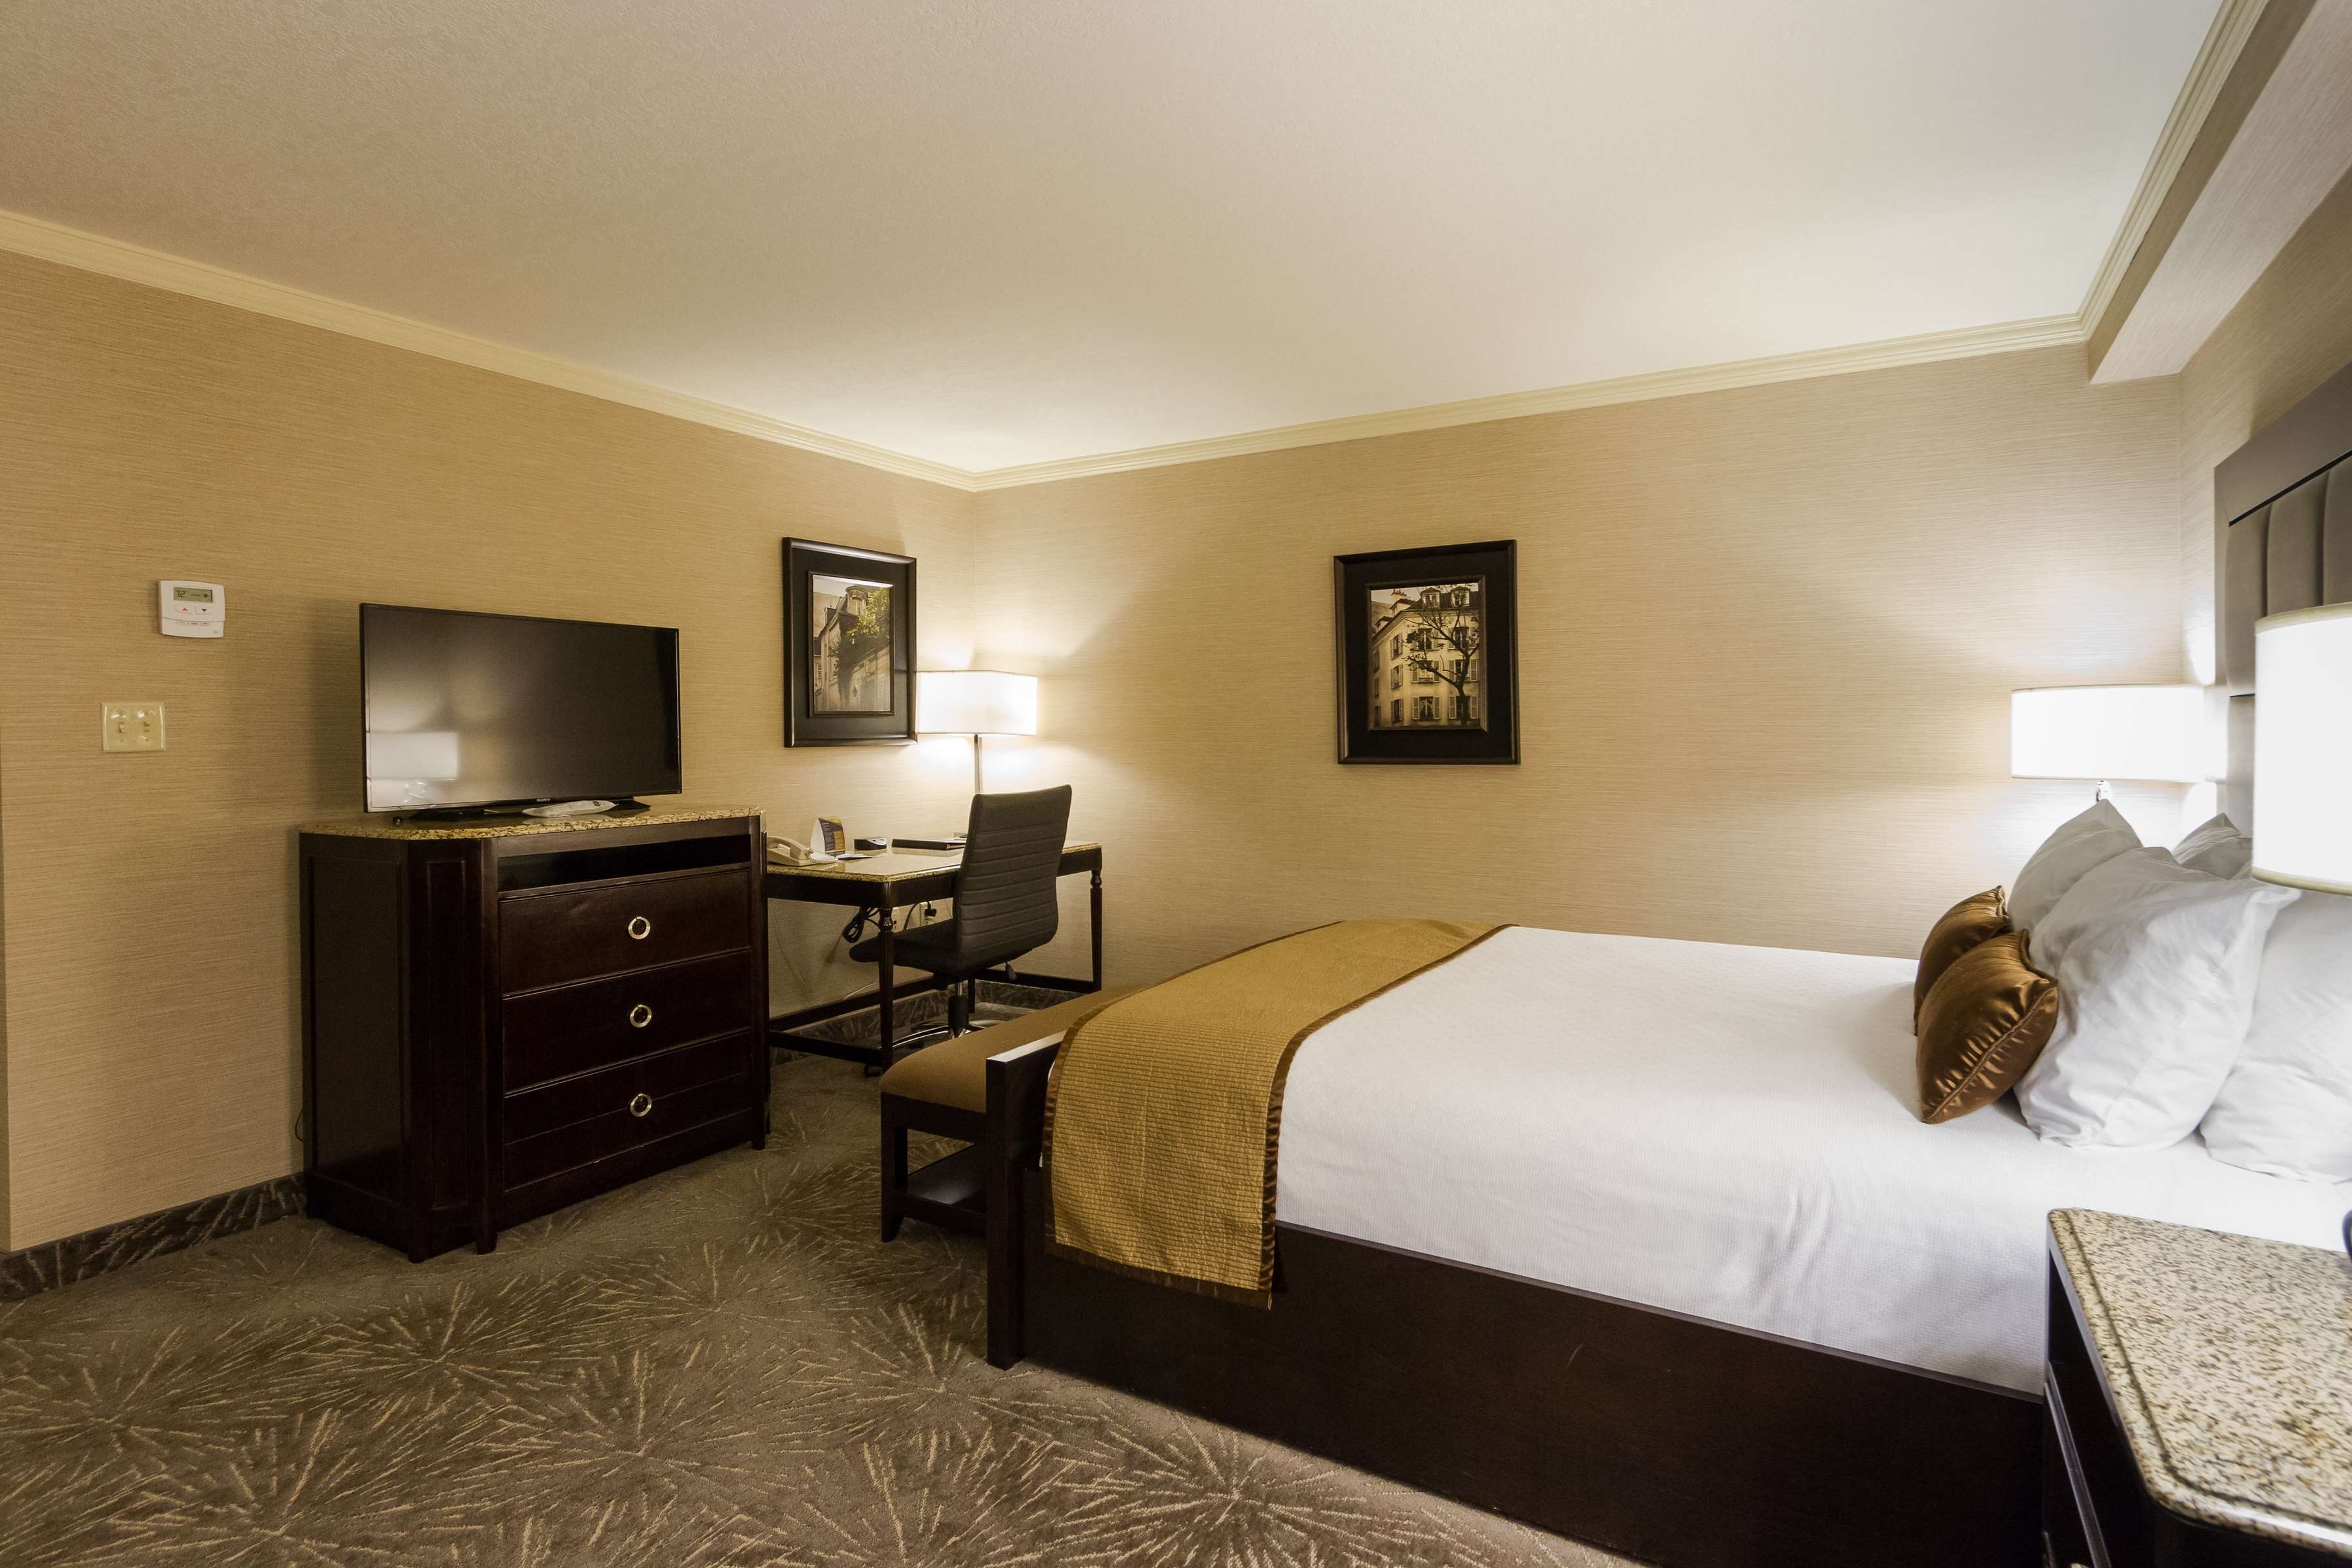 Queen Bed with Jetted Tub, Fireplace Best Western Plus The Arden Park Hotel Stratford (519)275-2936